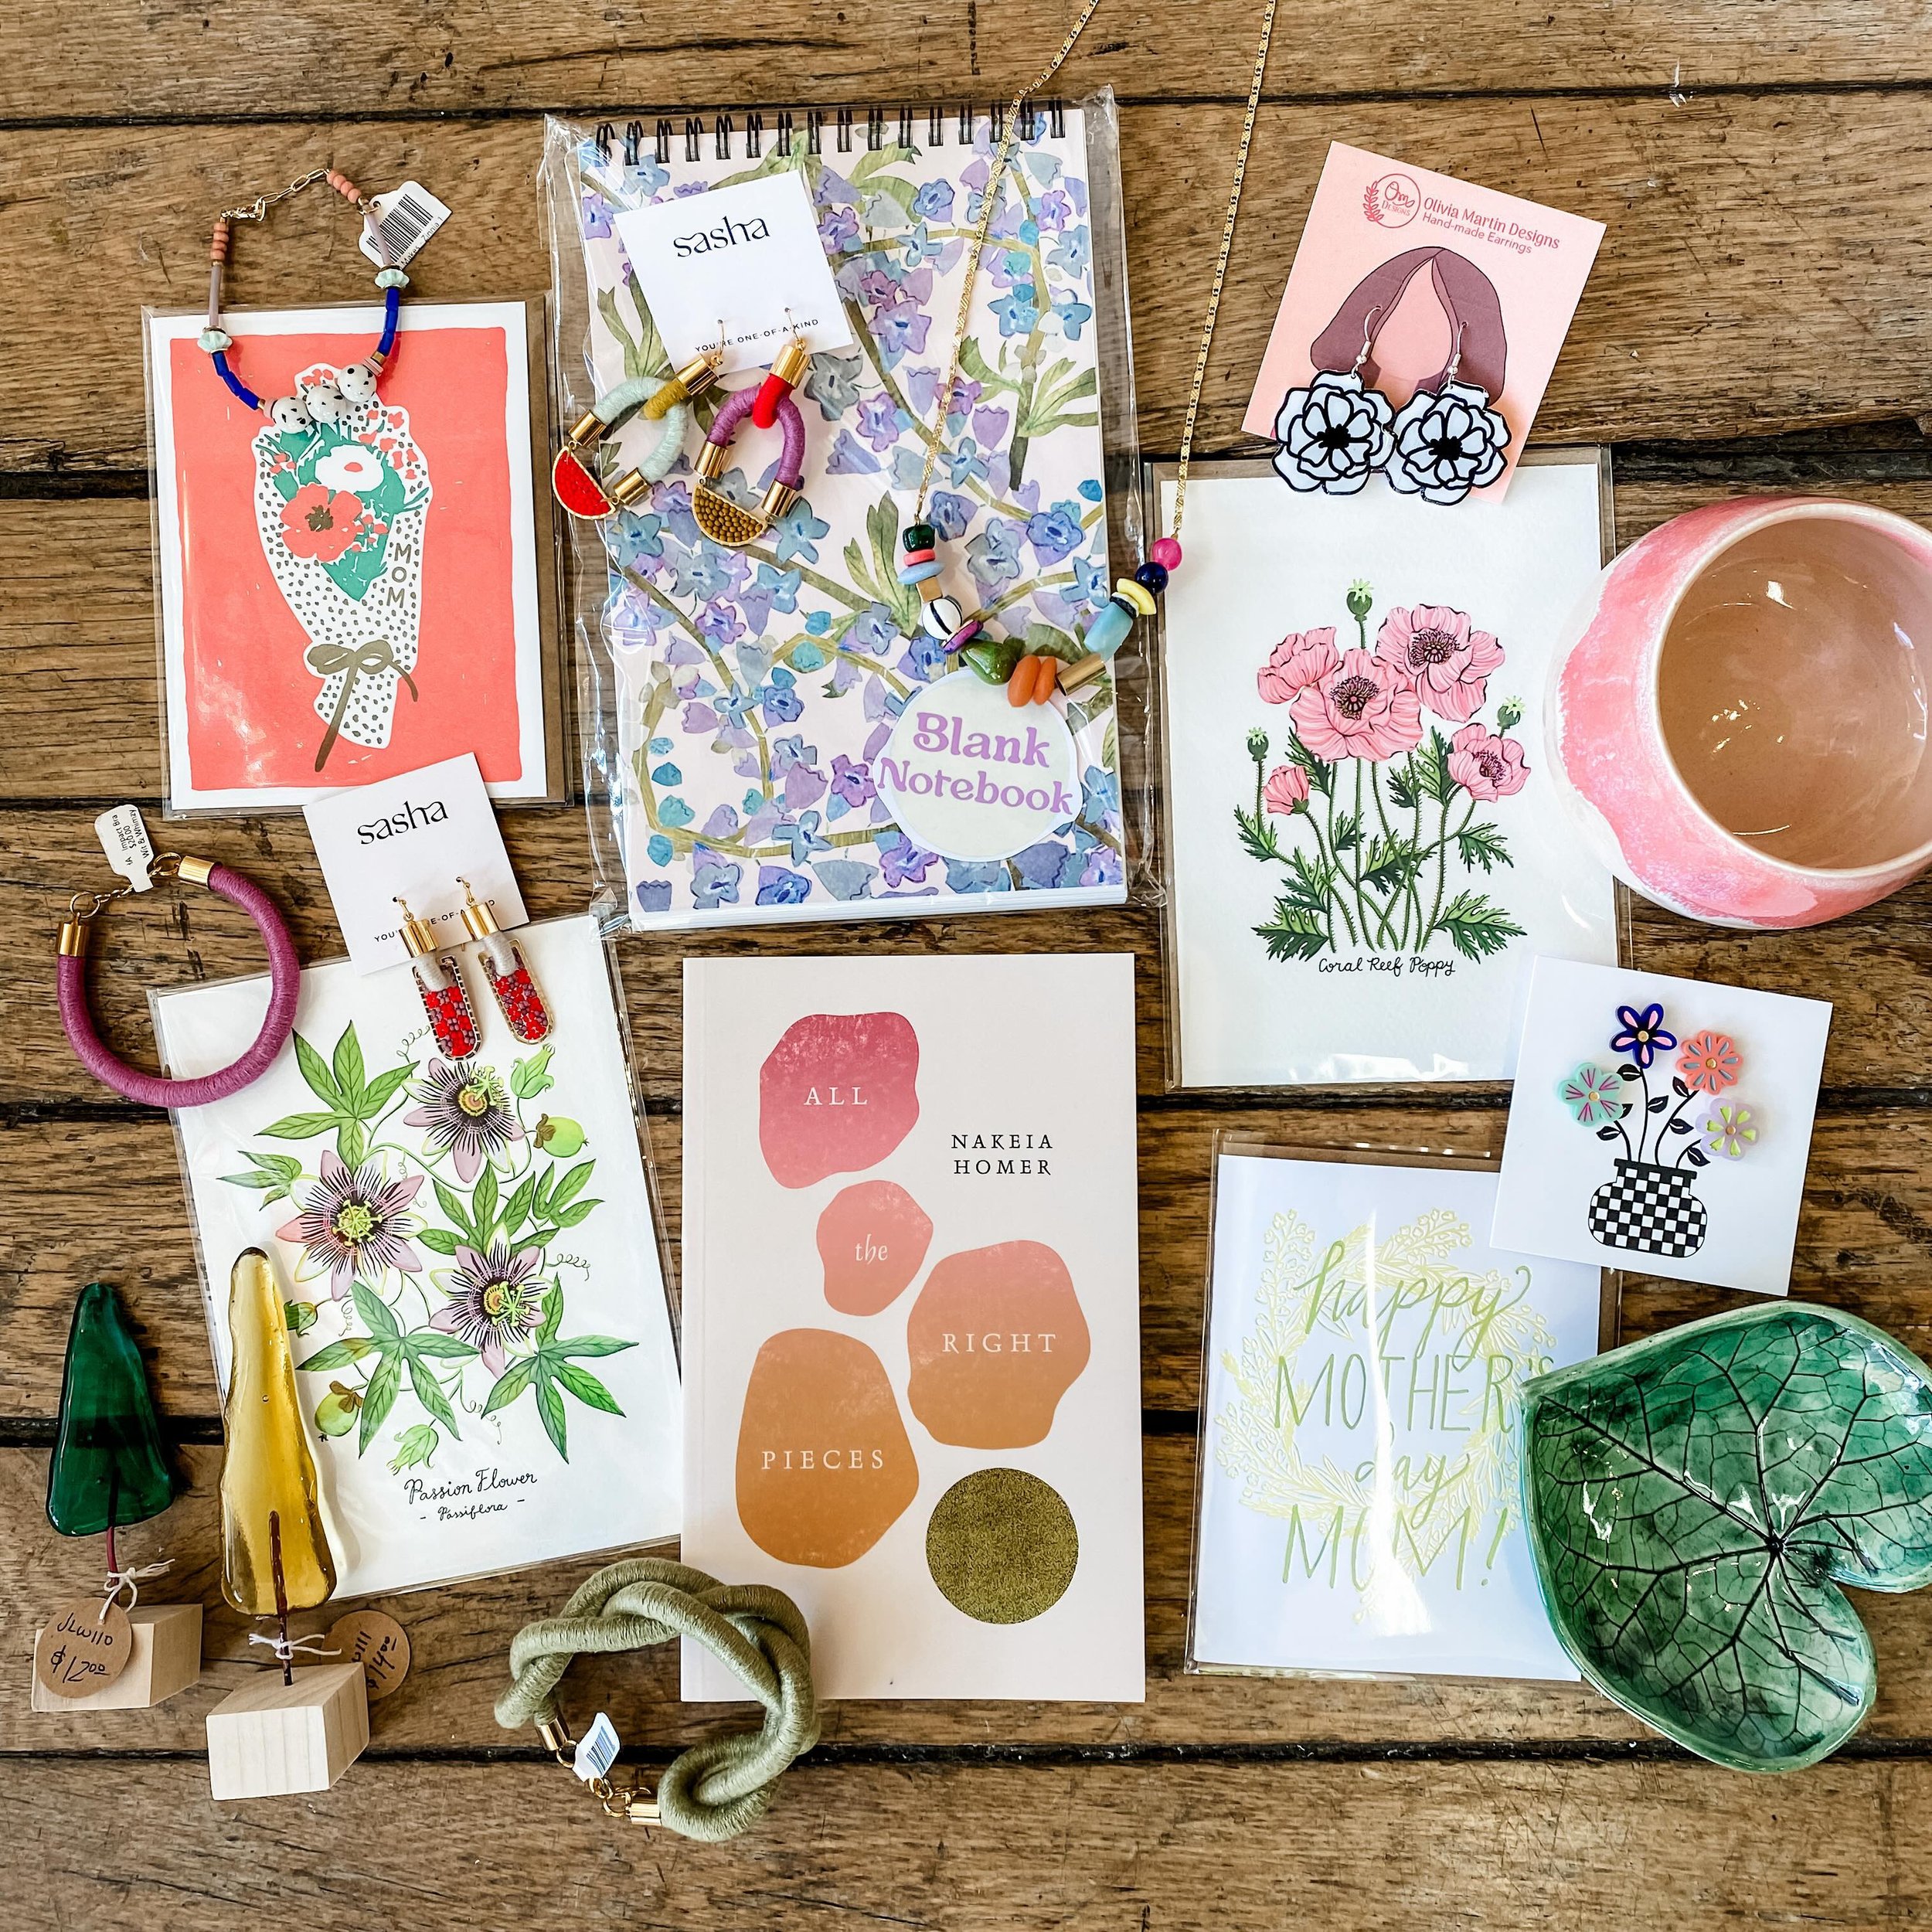 Don&rsquo;t forget your mama! We can help you find the perfect card &amp; gift to delight your mom 🙌 From handmade jewelry and ceramics to lovely art prints and poetry books, we&rsquo;ve got you covered, friends.

Open 11-6 today, 11-7 Friday and 10